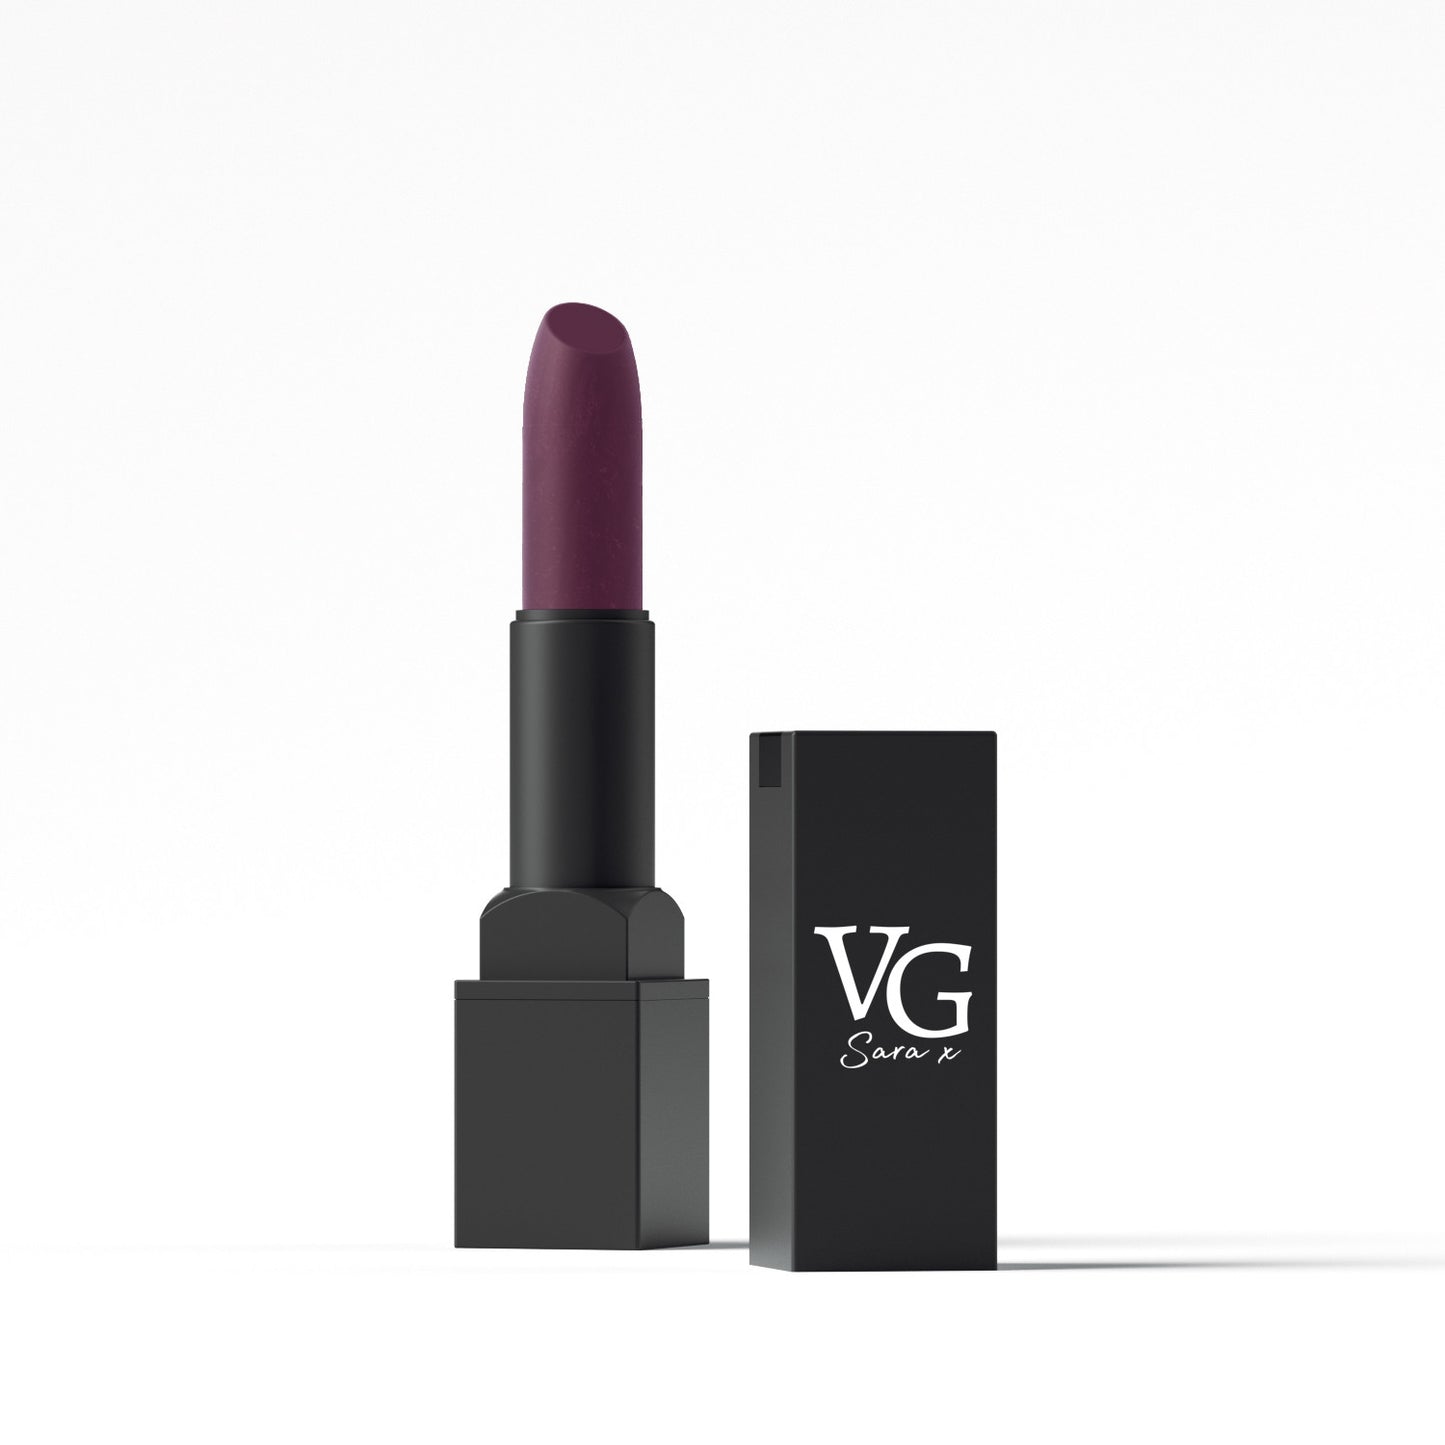 VG Cosmetics lipstick featuring the VG logo on the casing